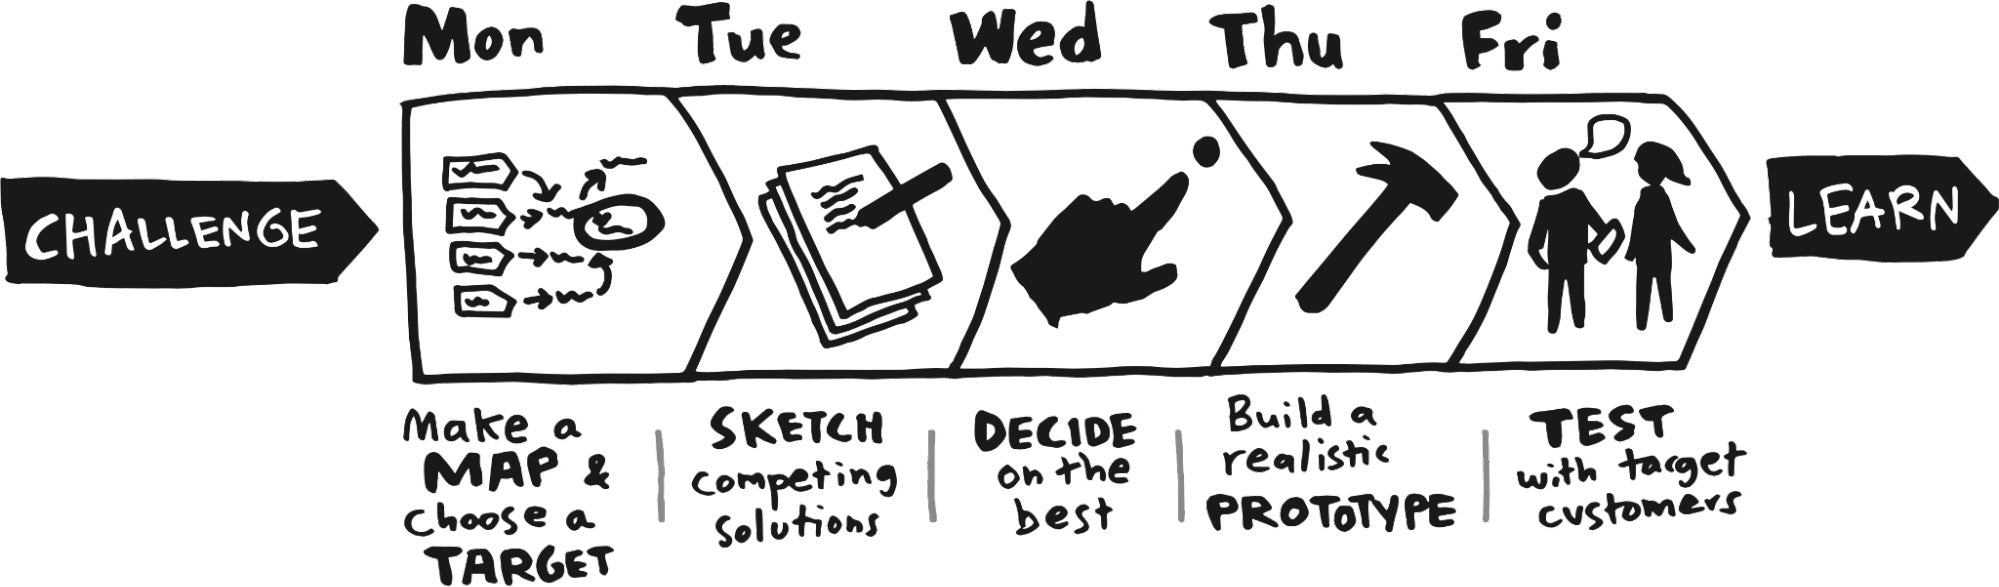 A one week sprint schedule infographic: Monday, map; Tuesday, sketch solutions; Wednesday, decide on the best; Thursday, build a prototype; Friday, test with the target audience